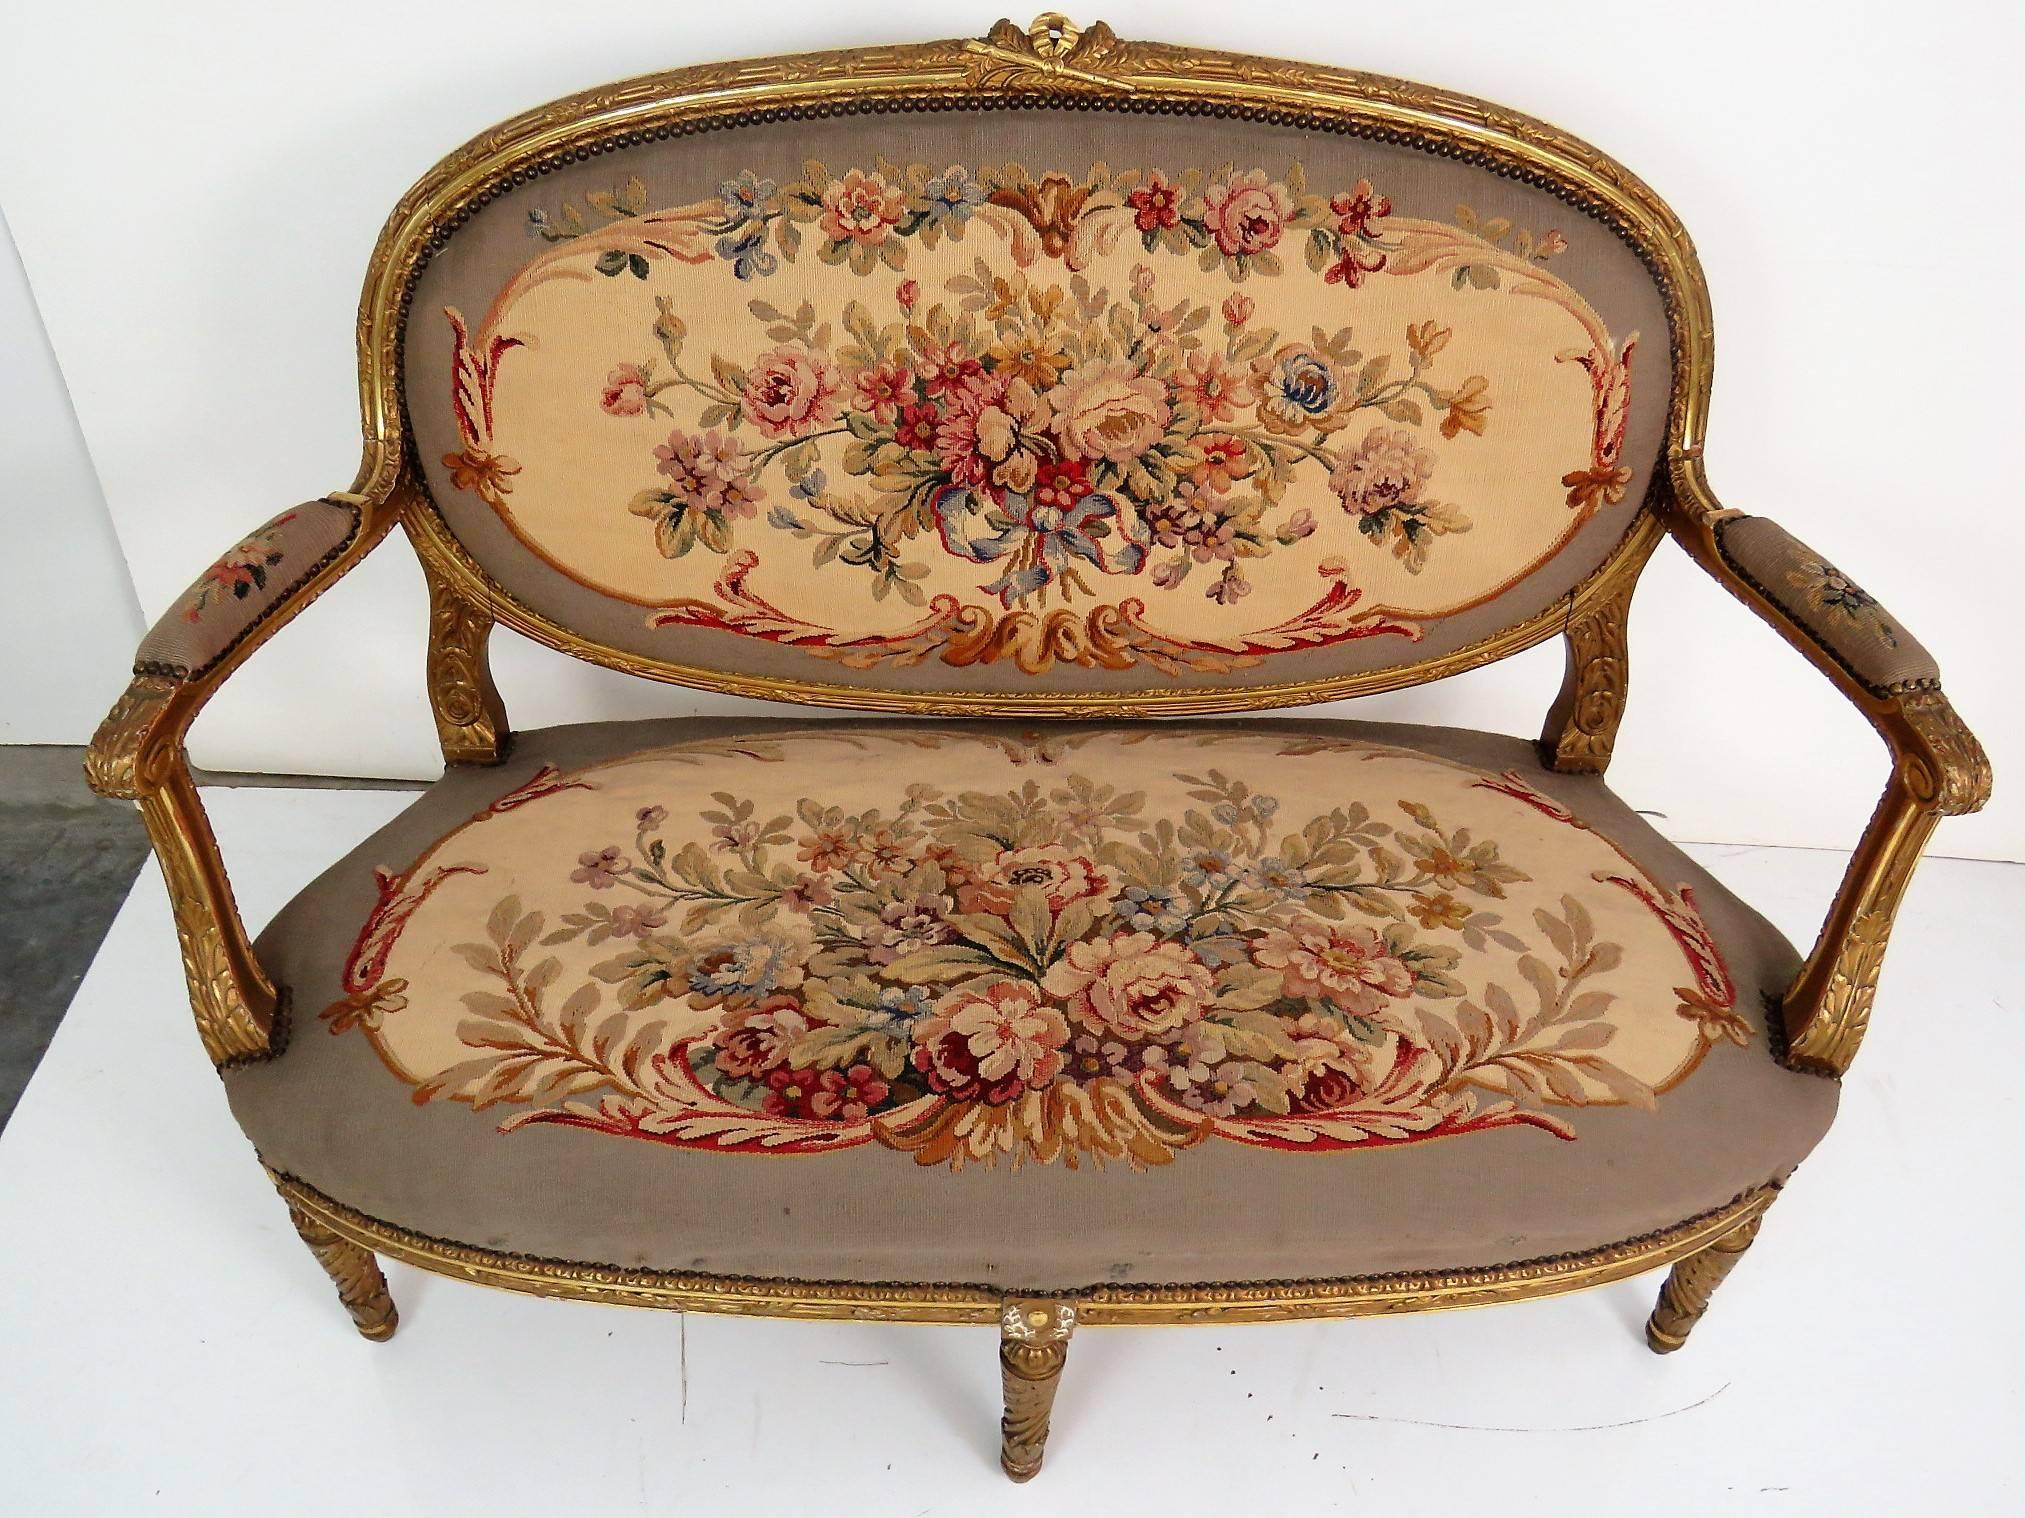 Fruitwood Antique French Louis XVI Style Gilt Carved Aubusson Upholstered Sofa Settee